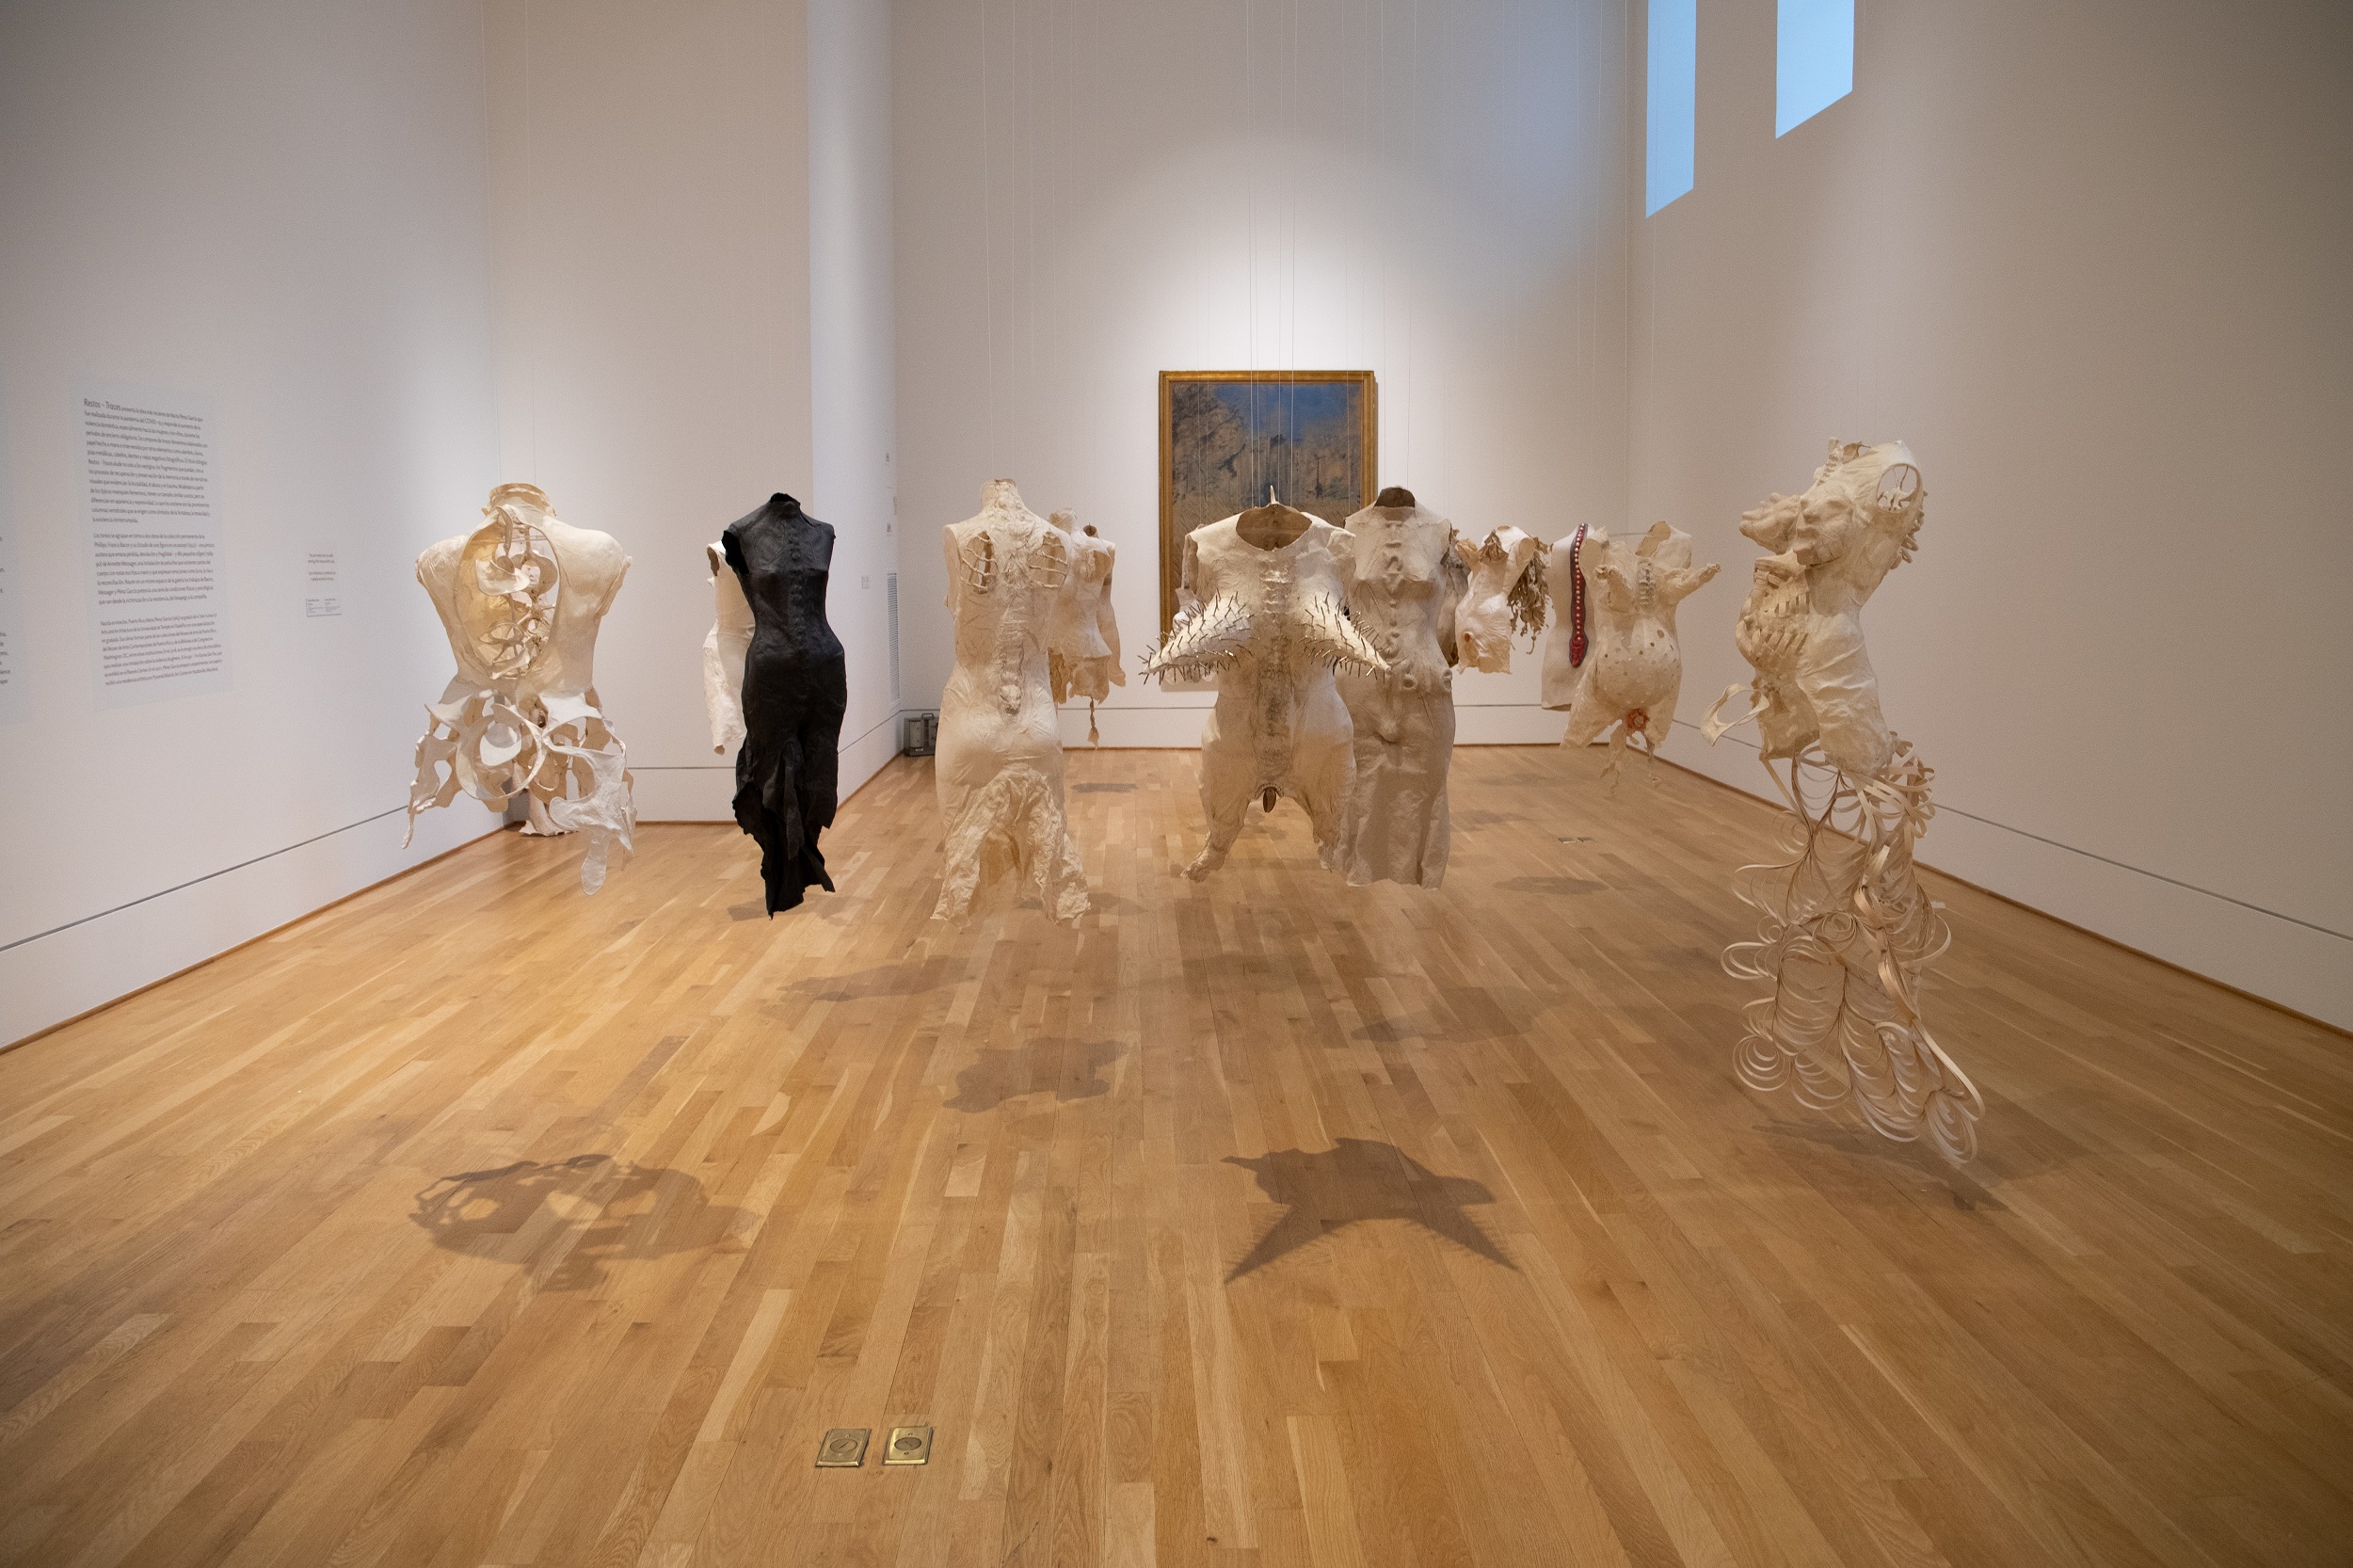 Interior view of a museum gallery with white walls and a wood floor, filled with sculptures of partial torsos.